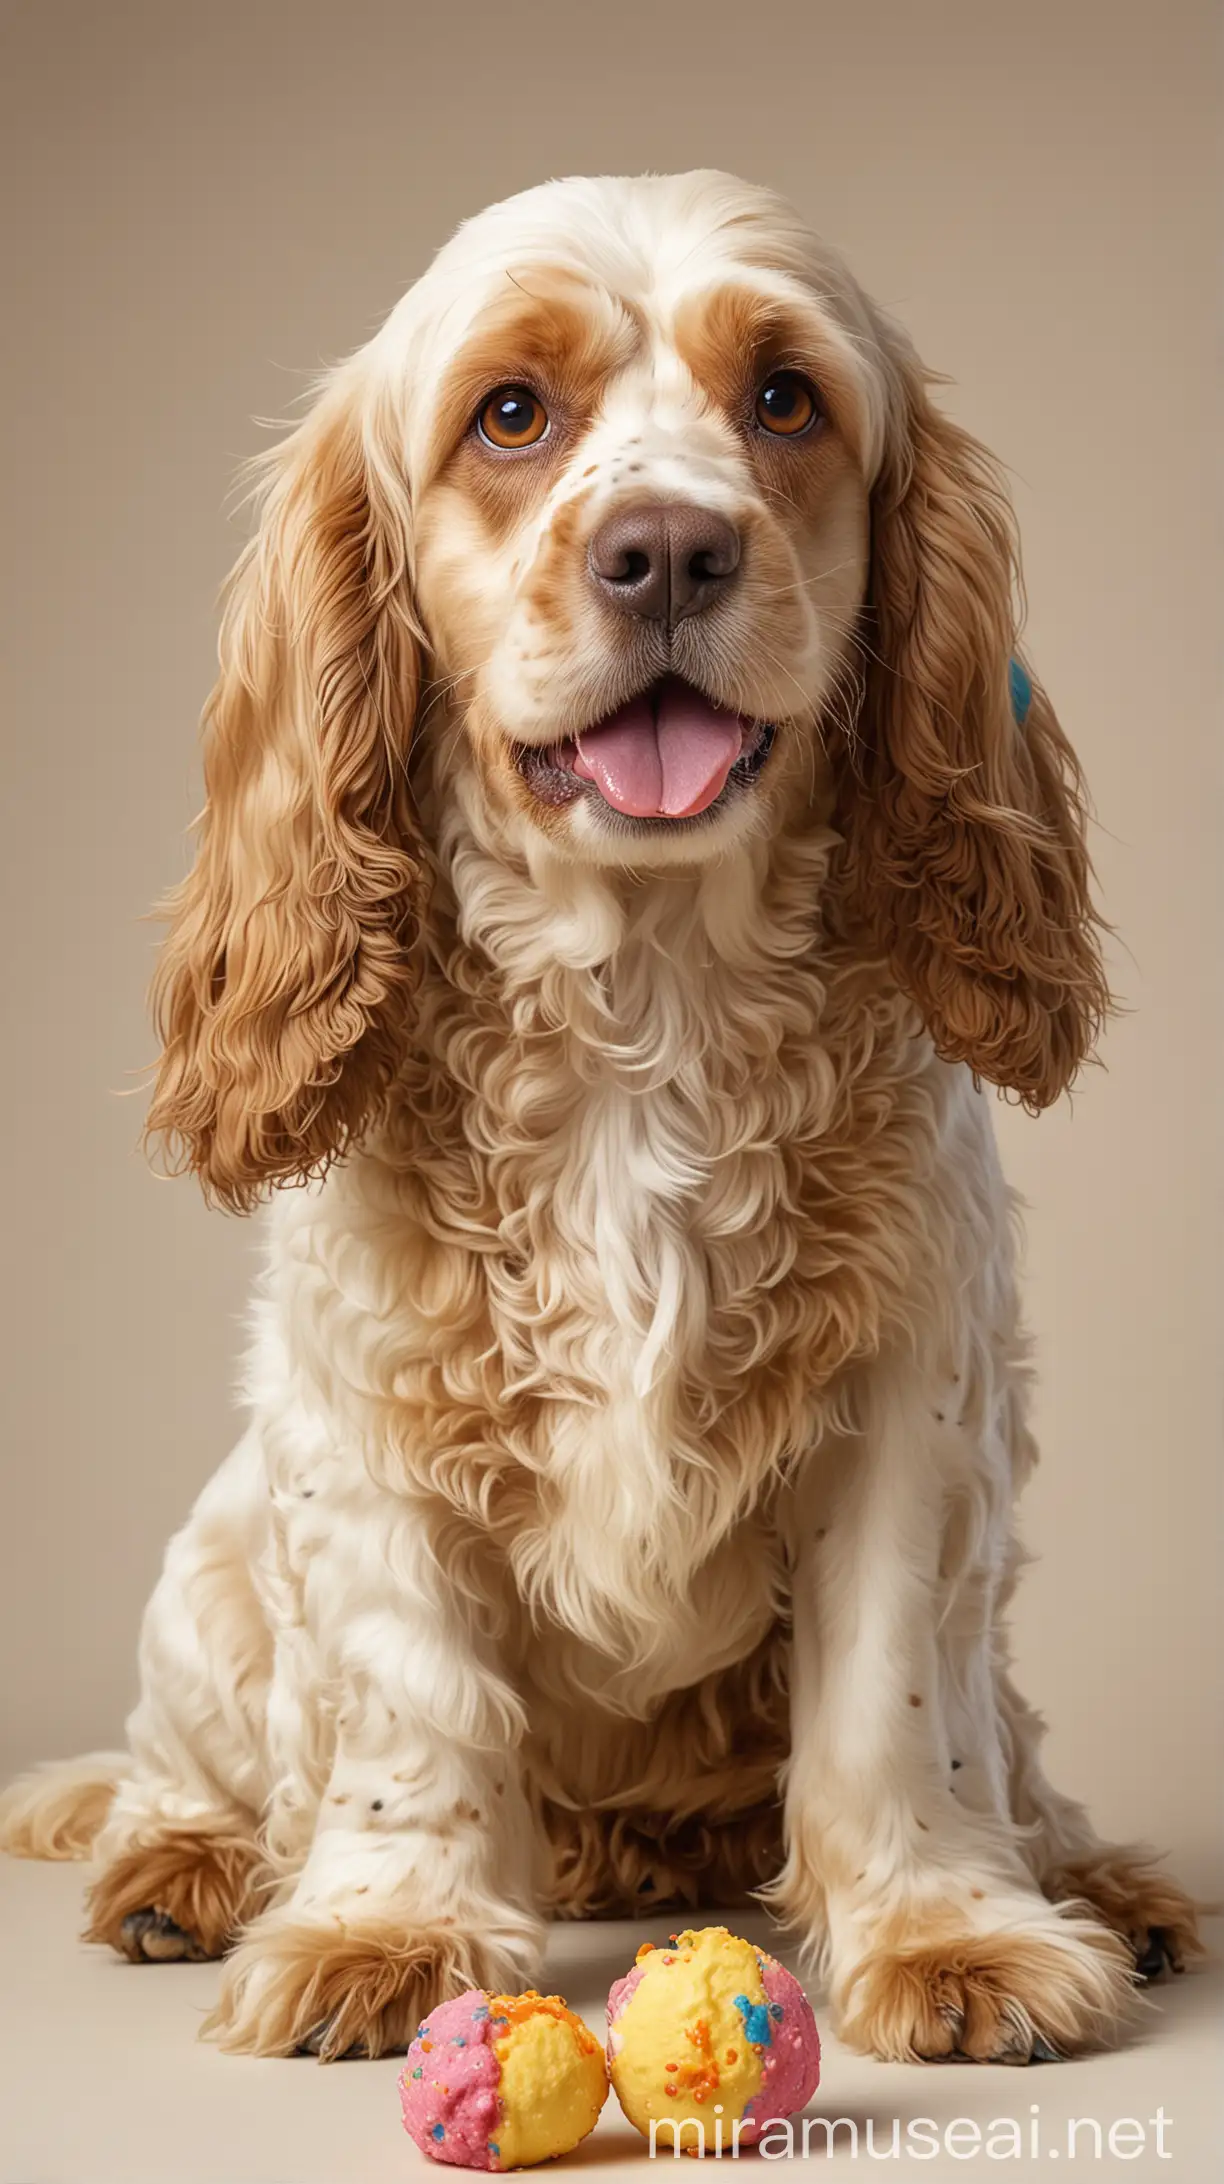 Hyper-realistic full-length photo of a cocker spaniel, 5 years old, with white fur with beige spots, beige ears, sitting, seen from the front and from above, looking happily at the camera, with a sweet colorful treat in its mouth. Natural lighting. Neutral background, defined contours.